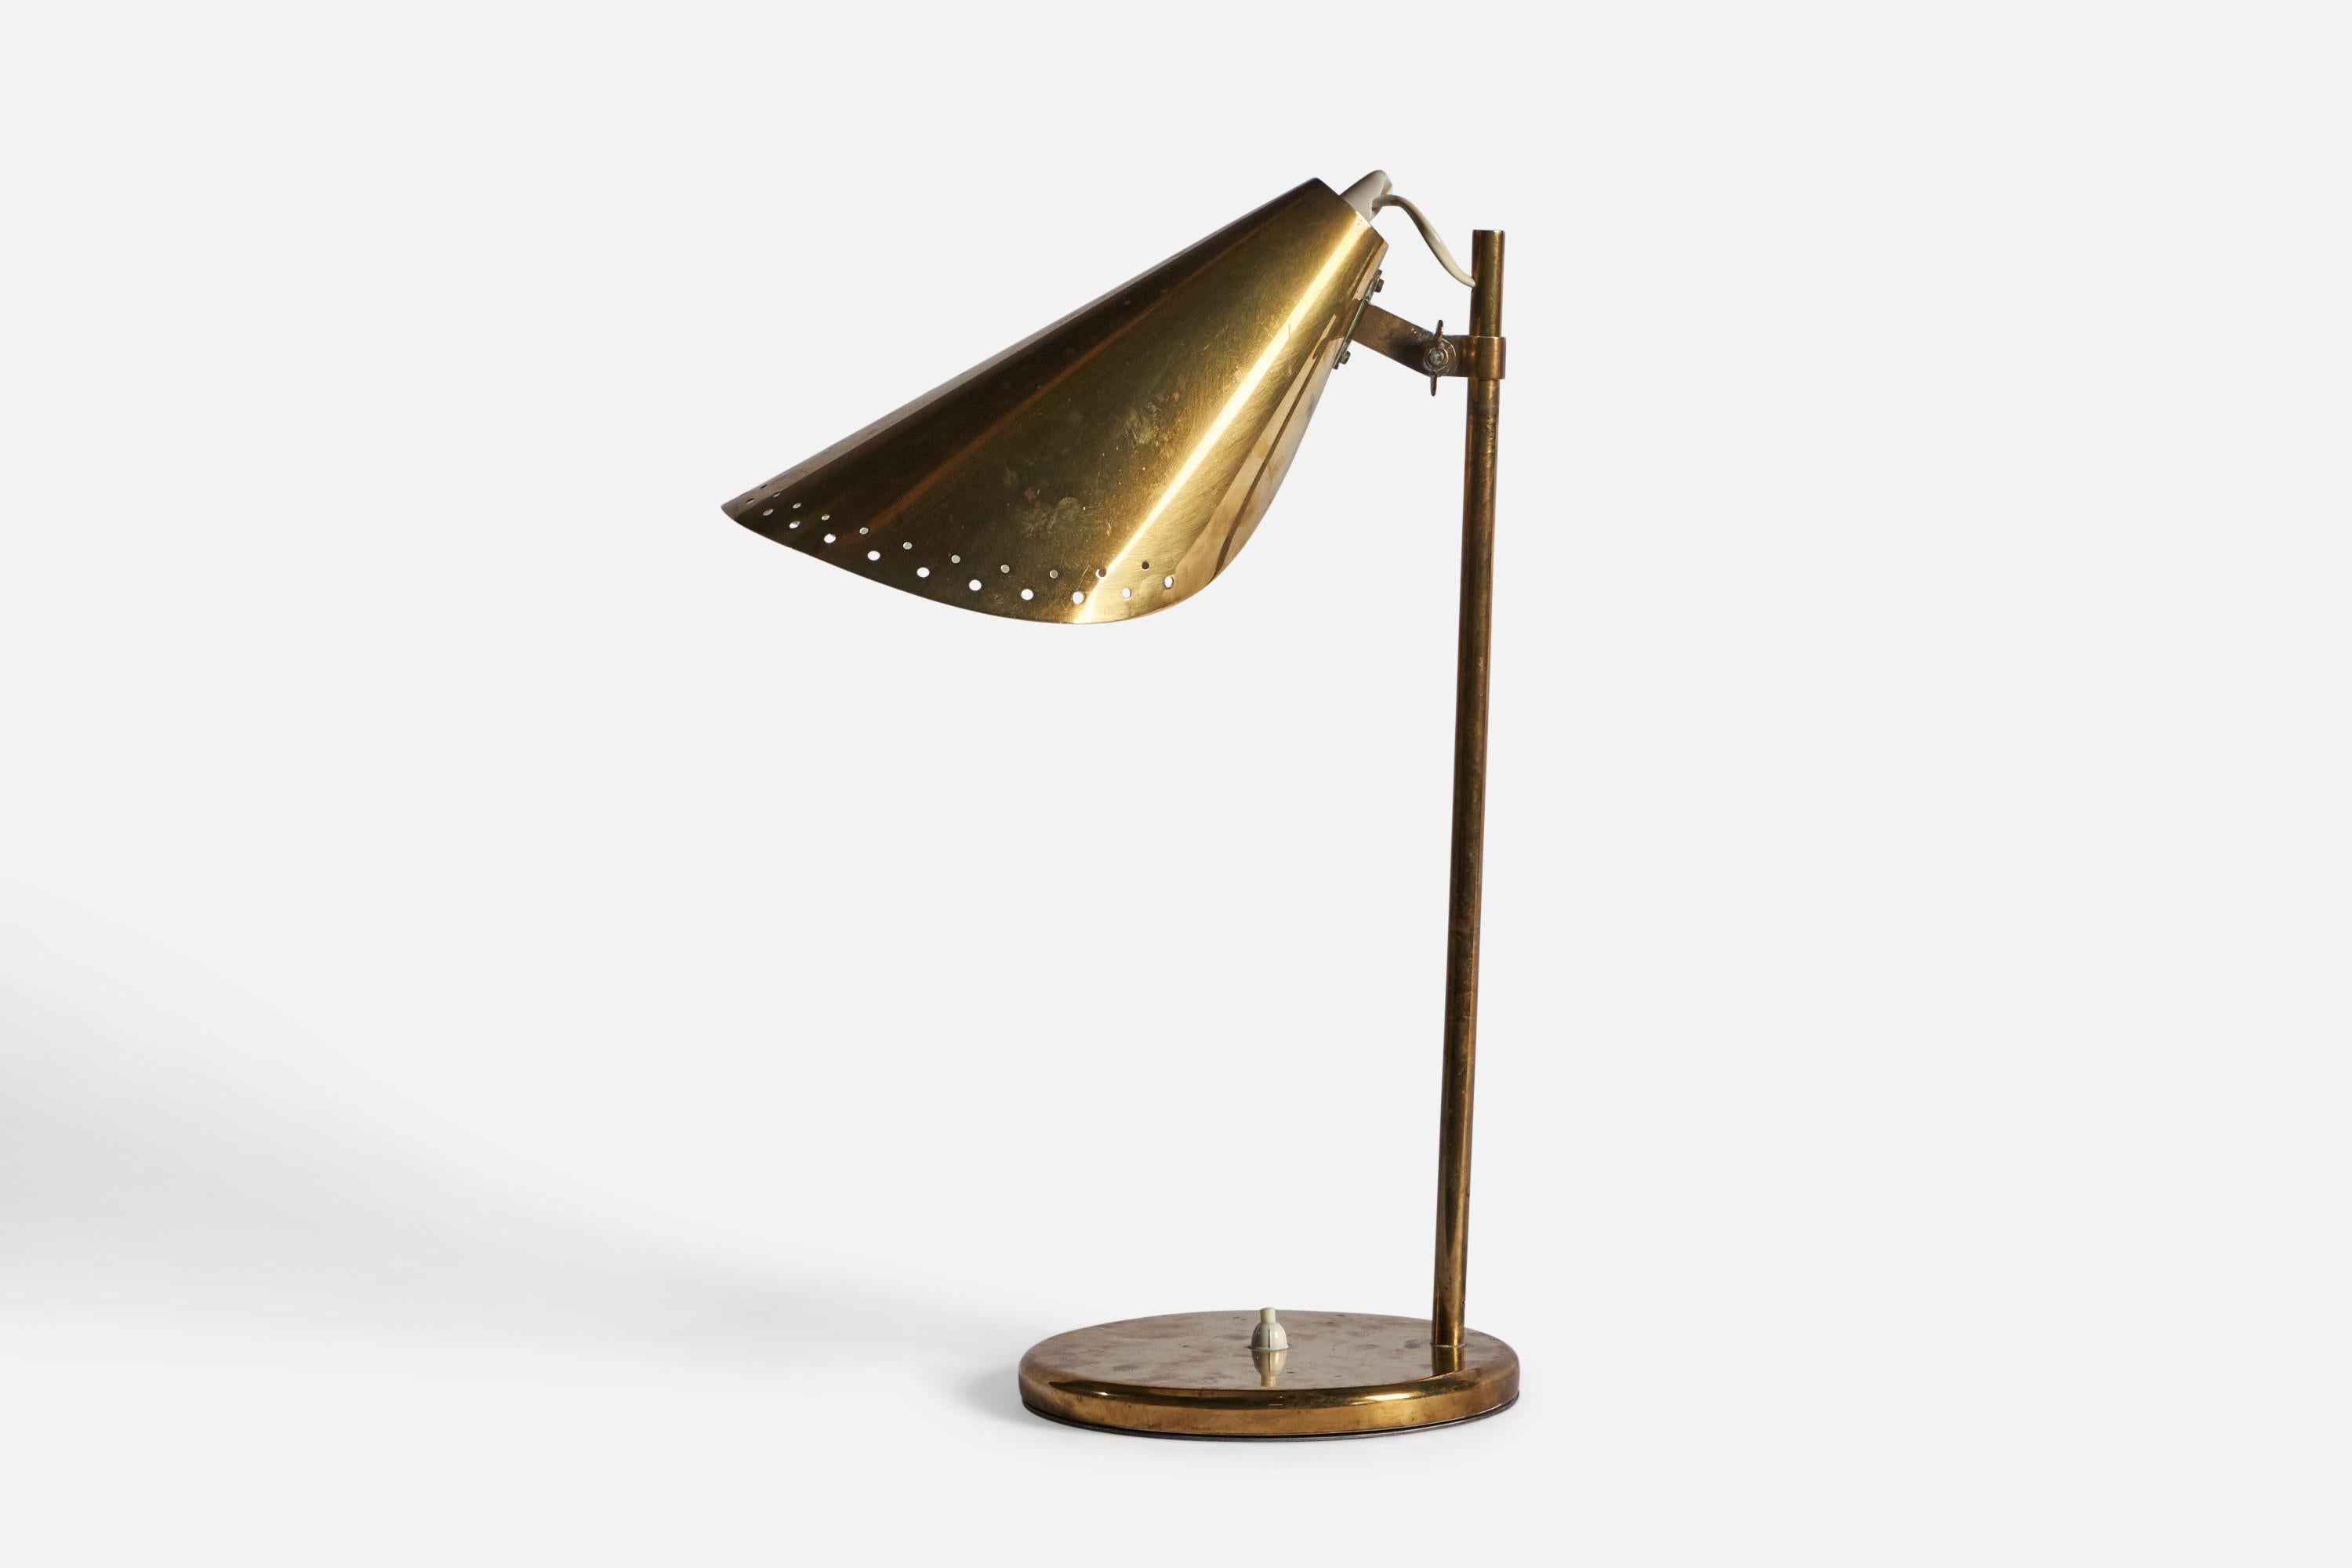 A brass table lamp, designed and produced in Finland, 1940s.

Overall Dimensions: 19